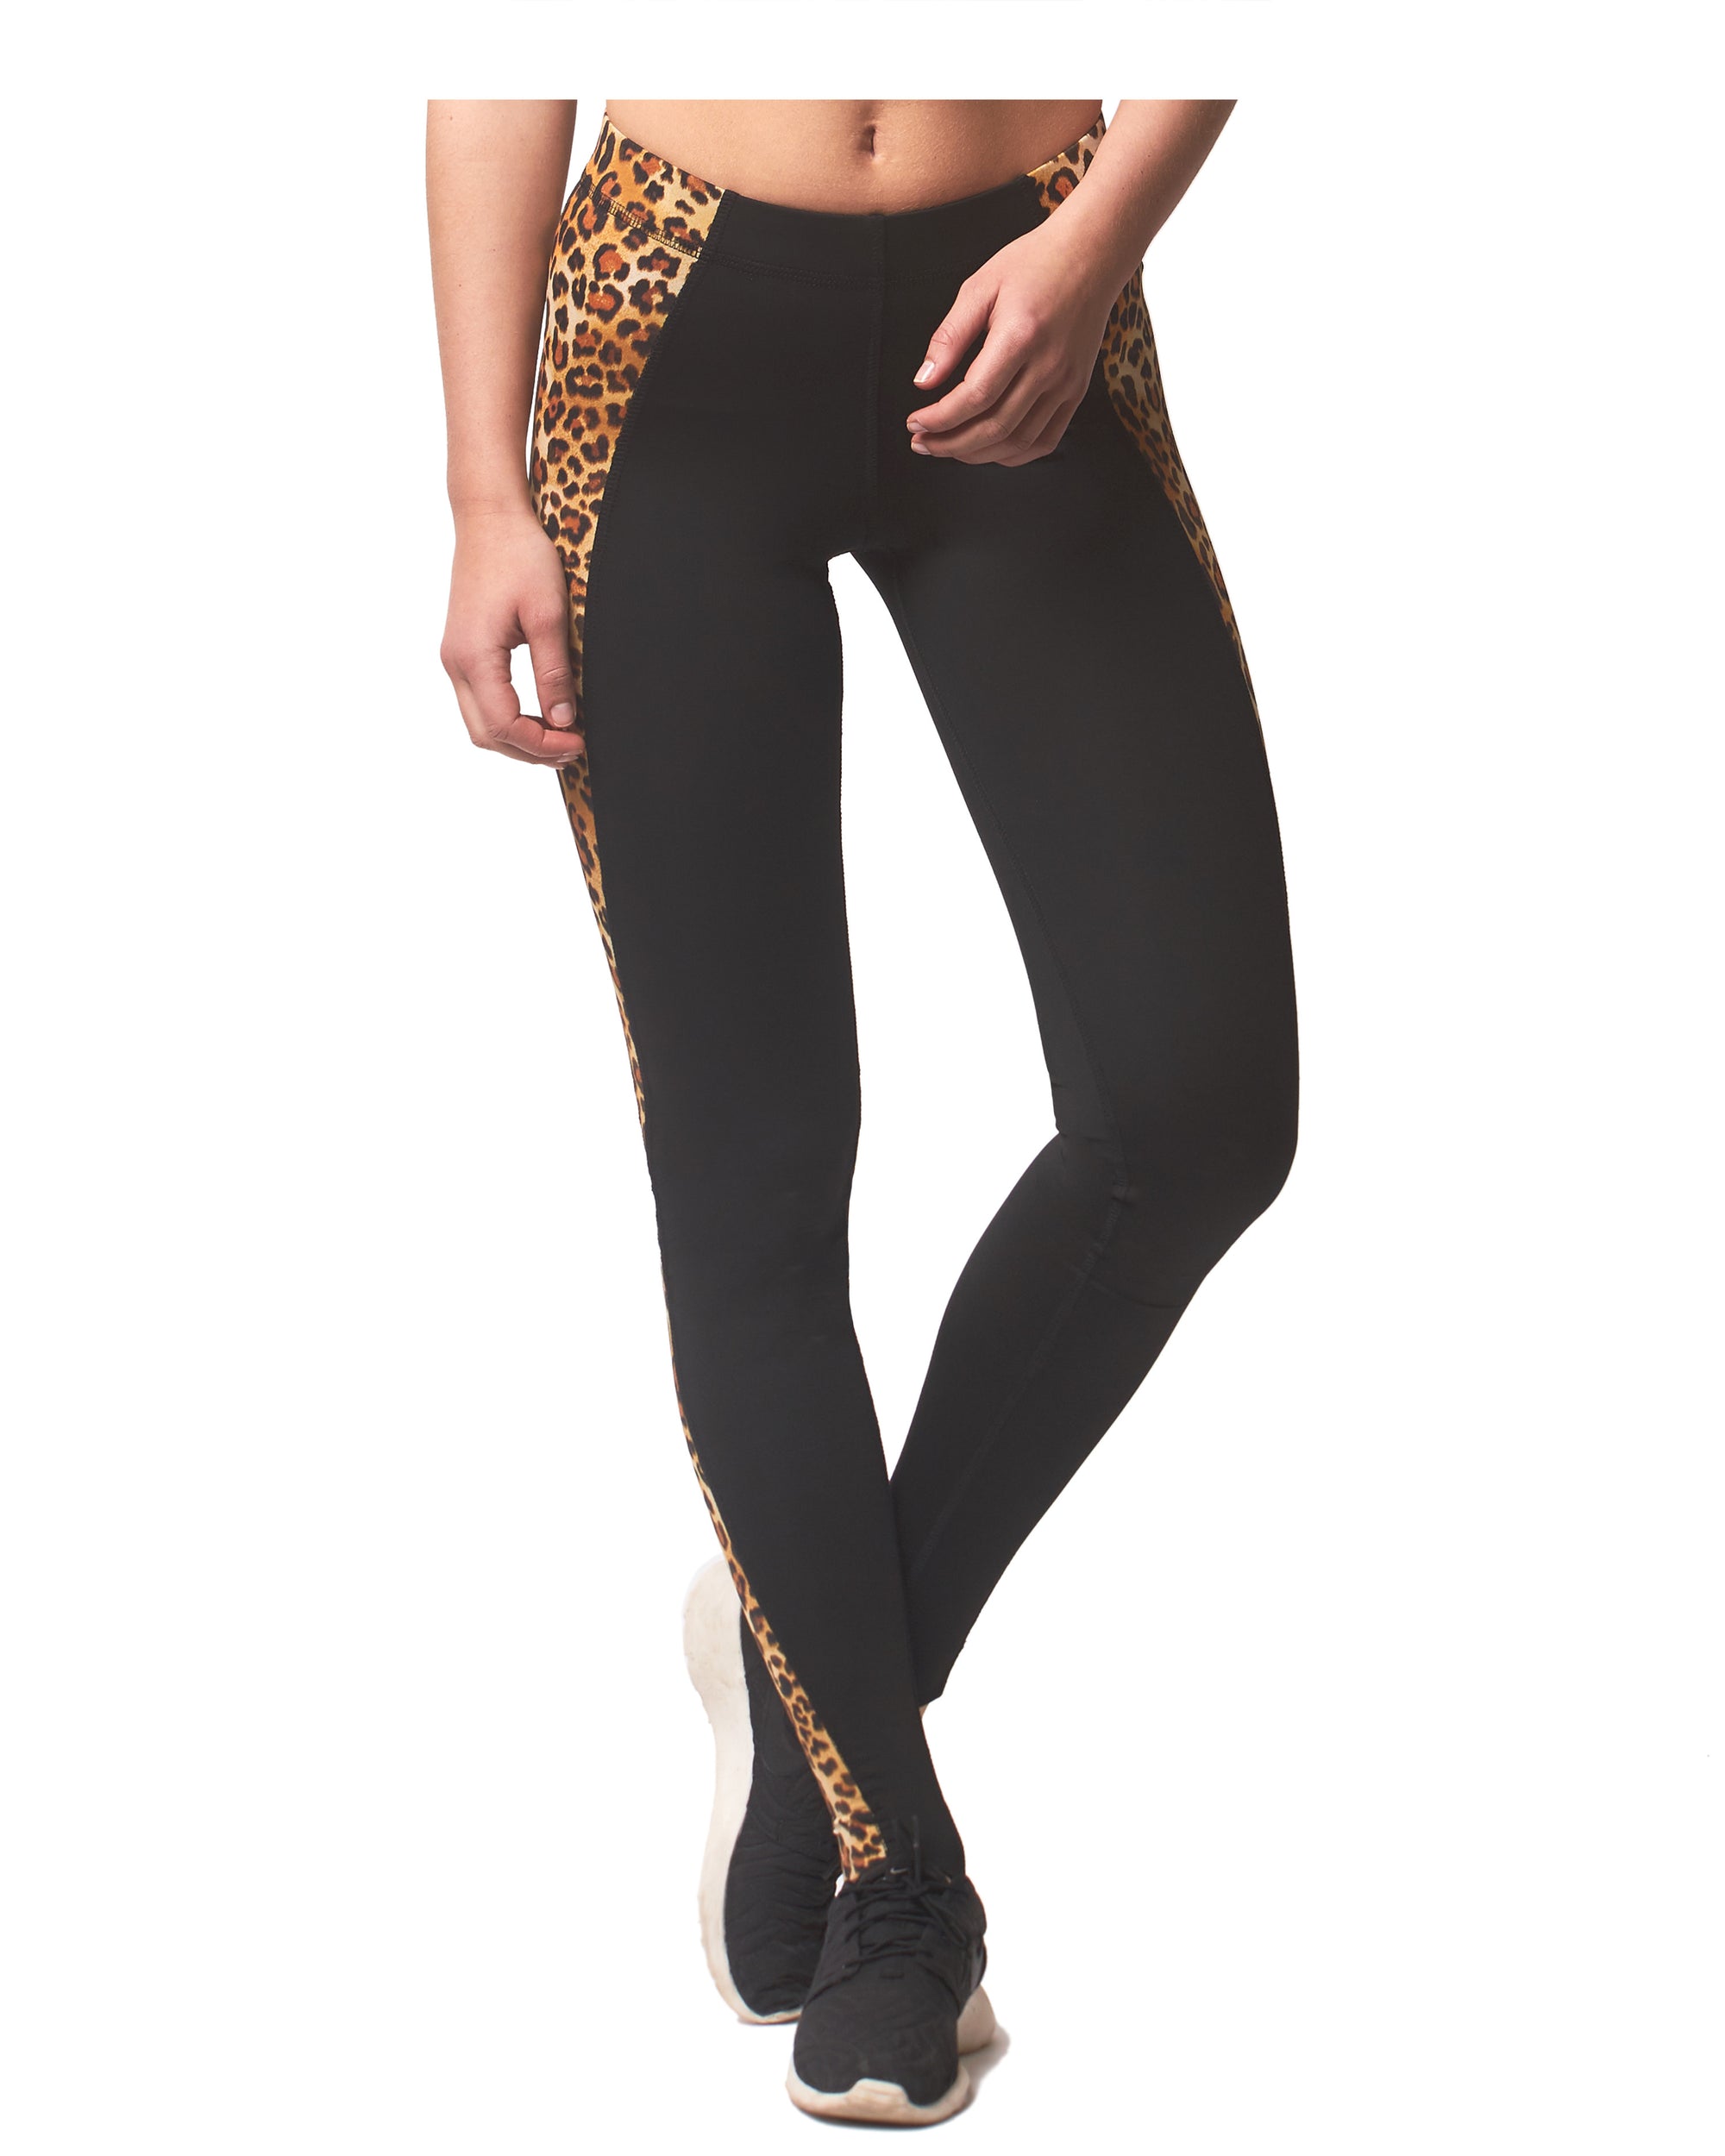 Workout leggings - Black and leopard print - Shaping performance